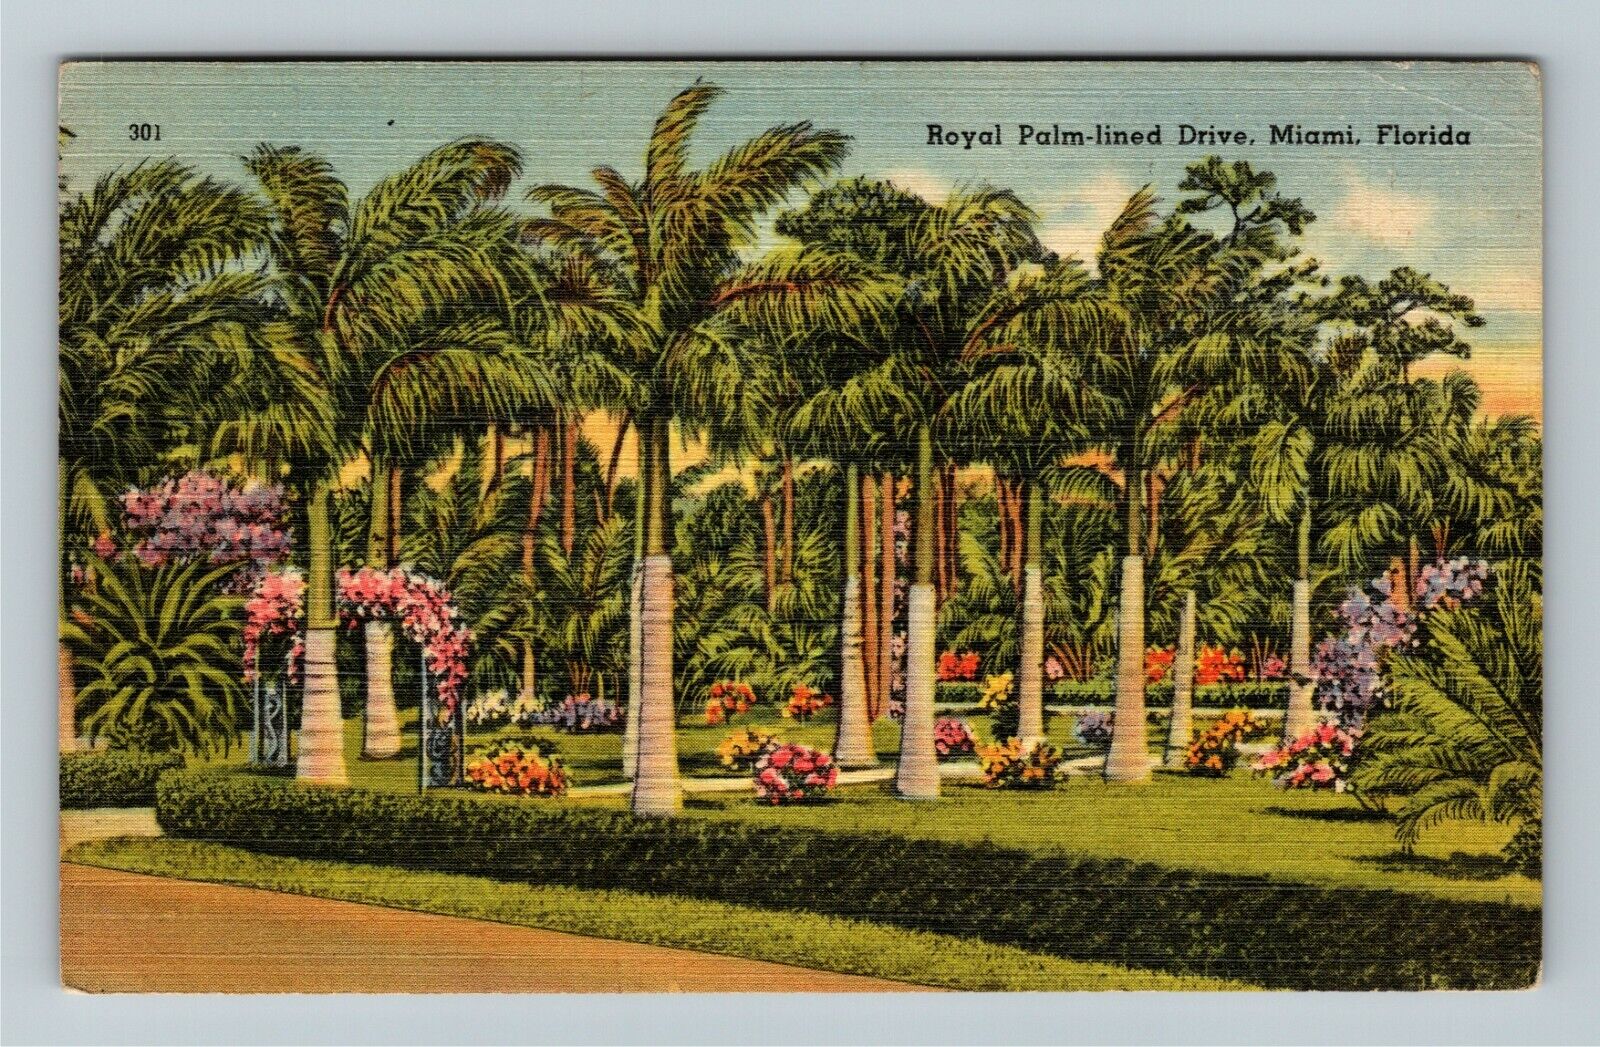 Miami FL-Florida, The Stately Royal Palm lined Floral Pathway, Vintage Postcard